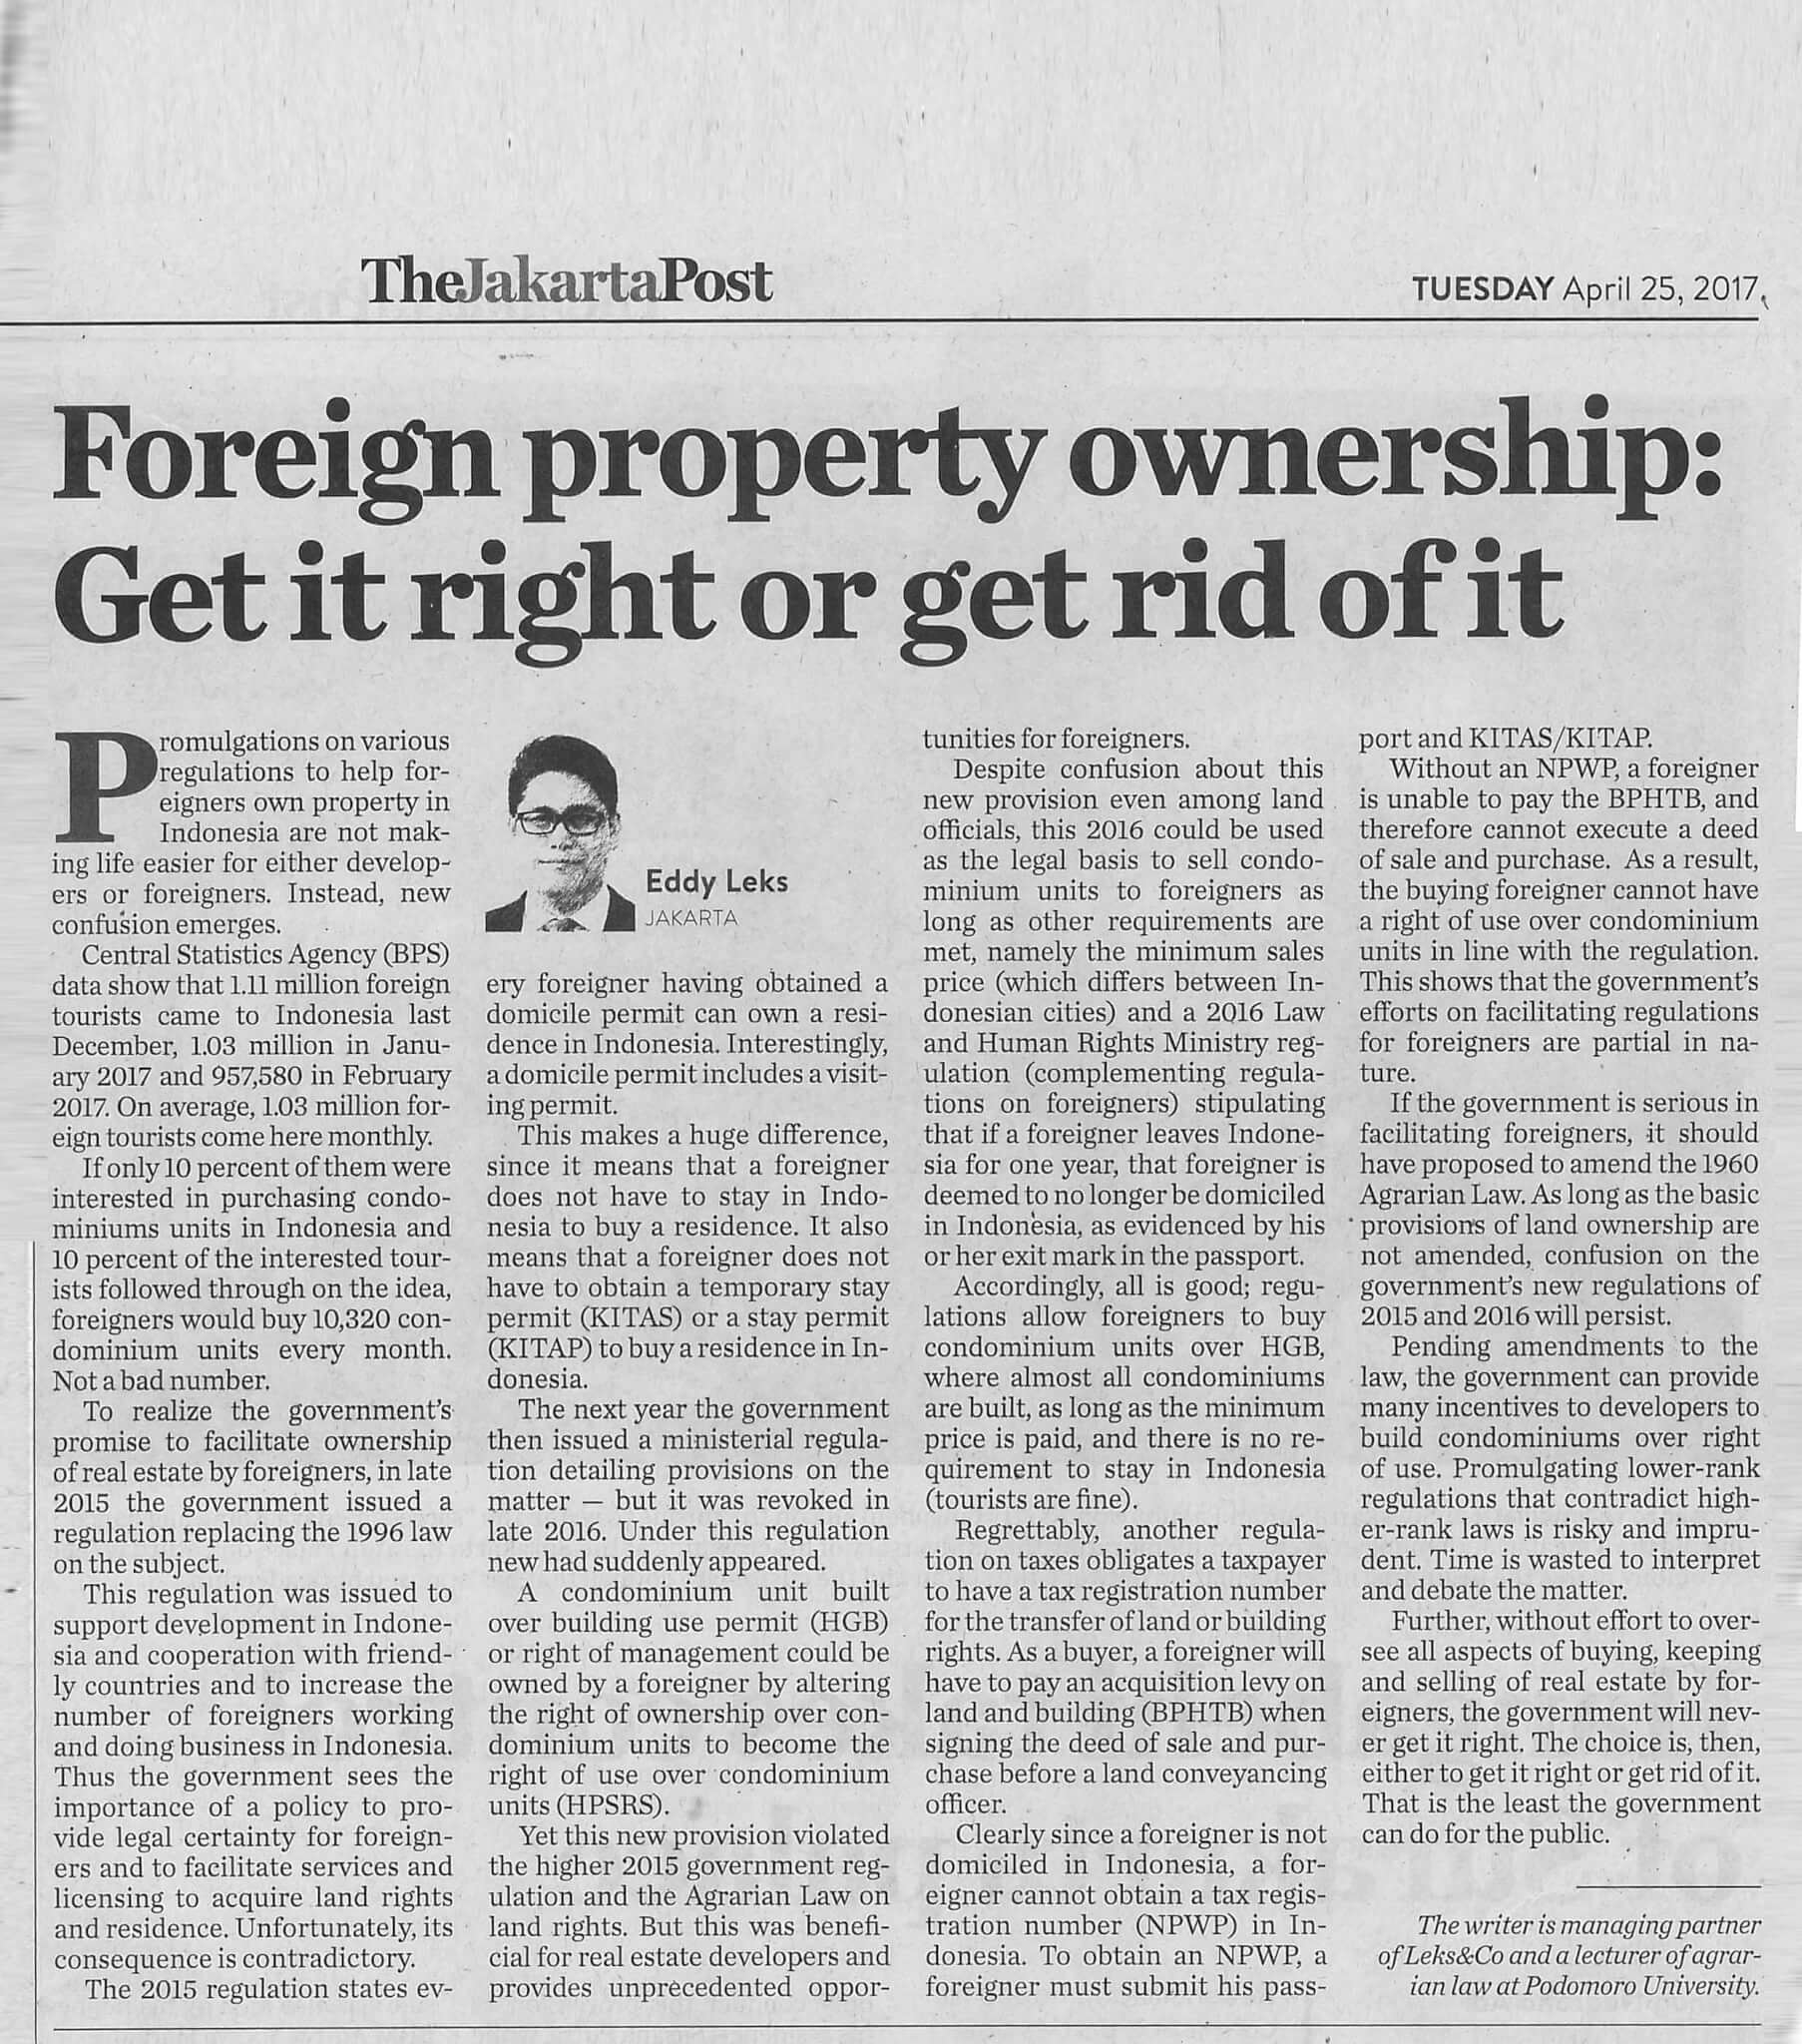 Eddy Leks’ Opinion Published in The Jakarta Post